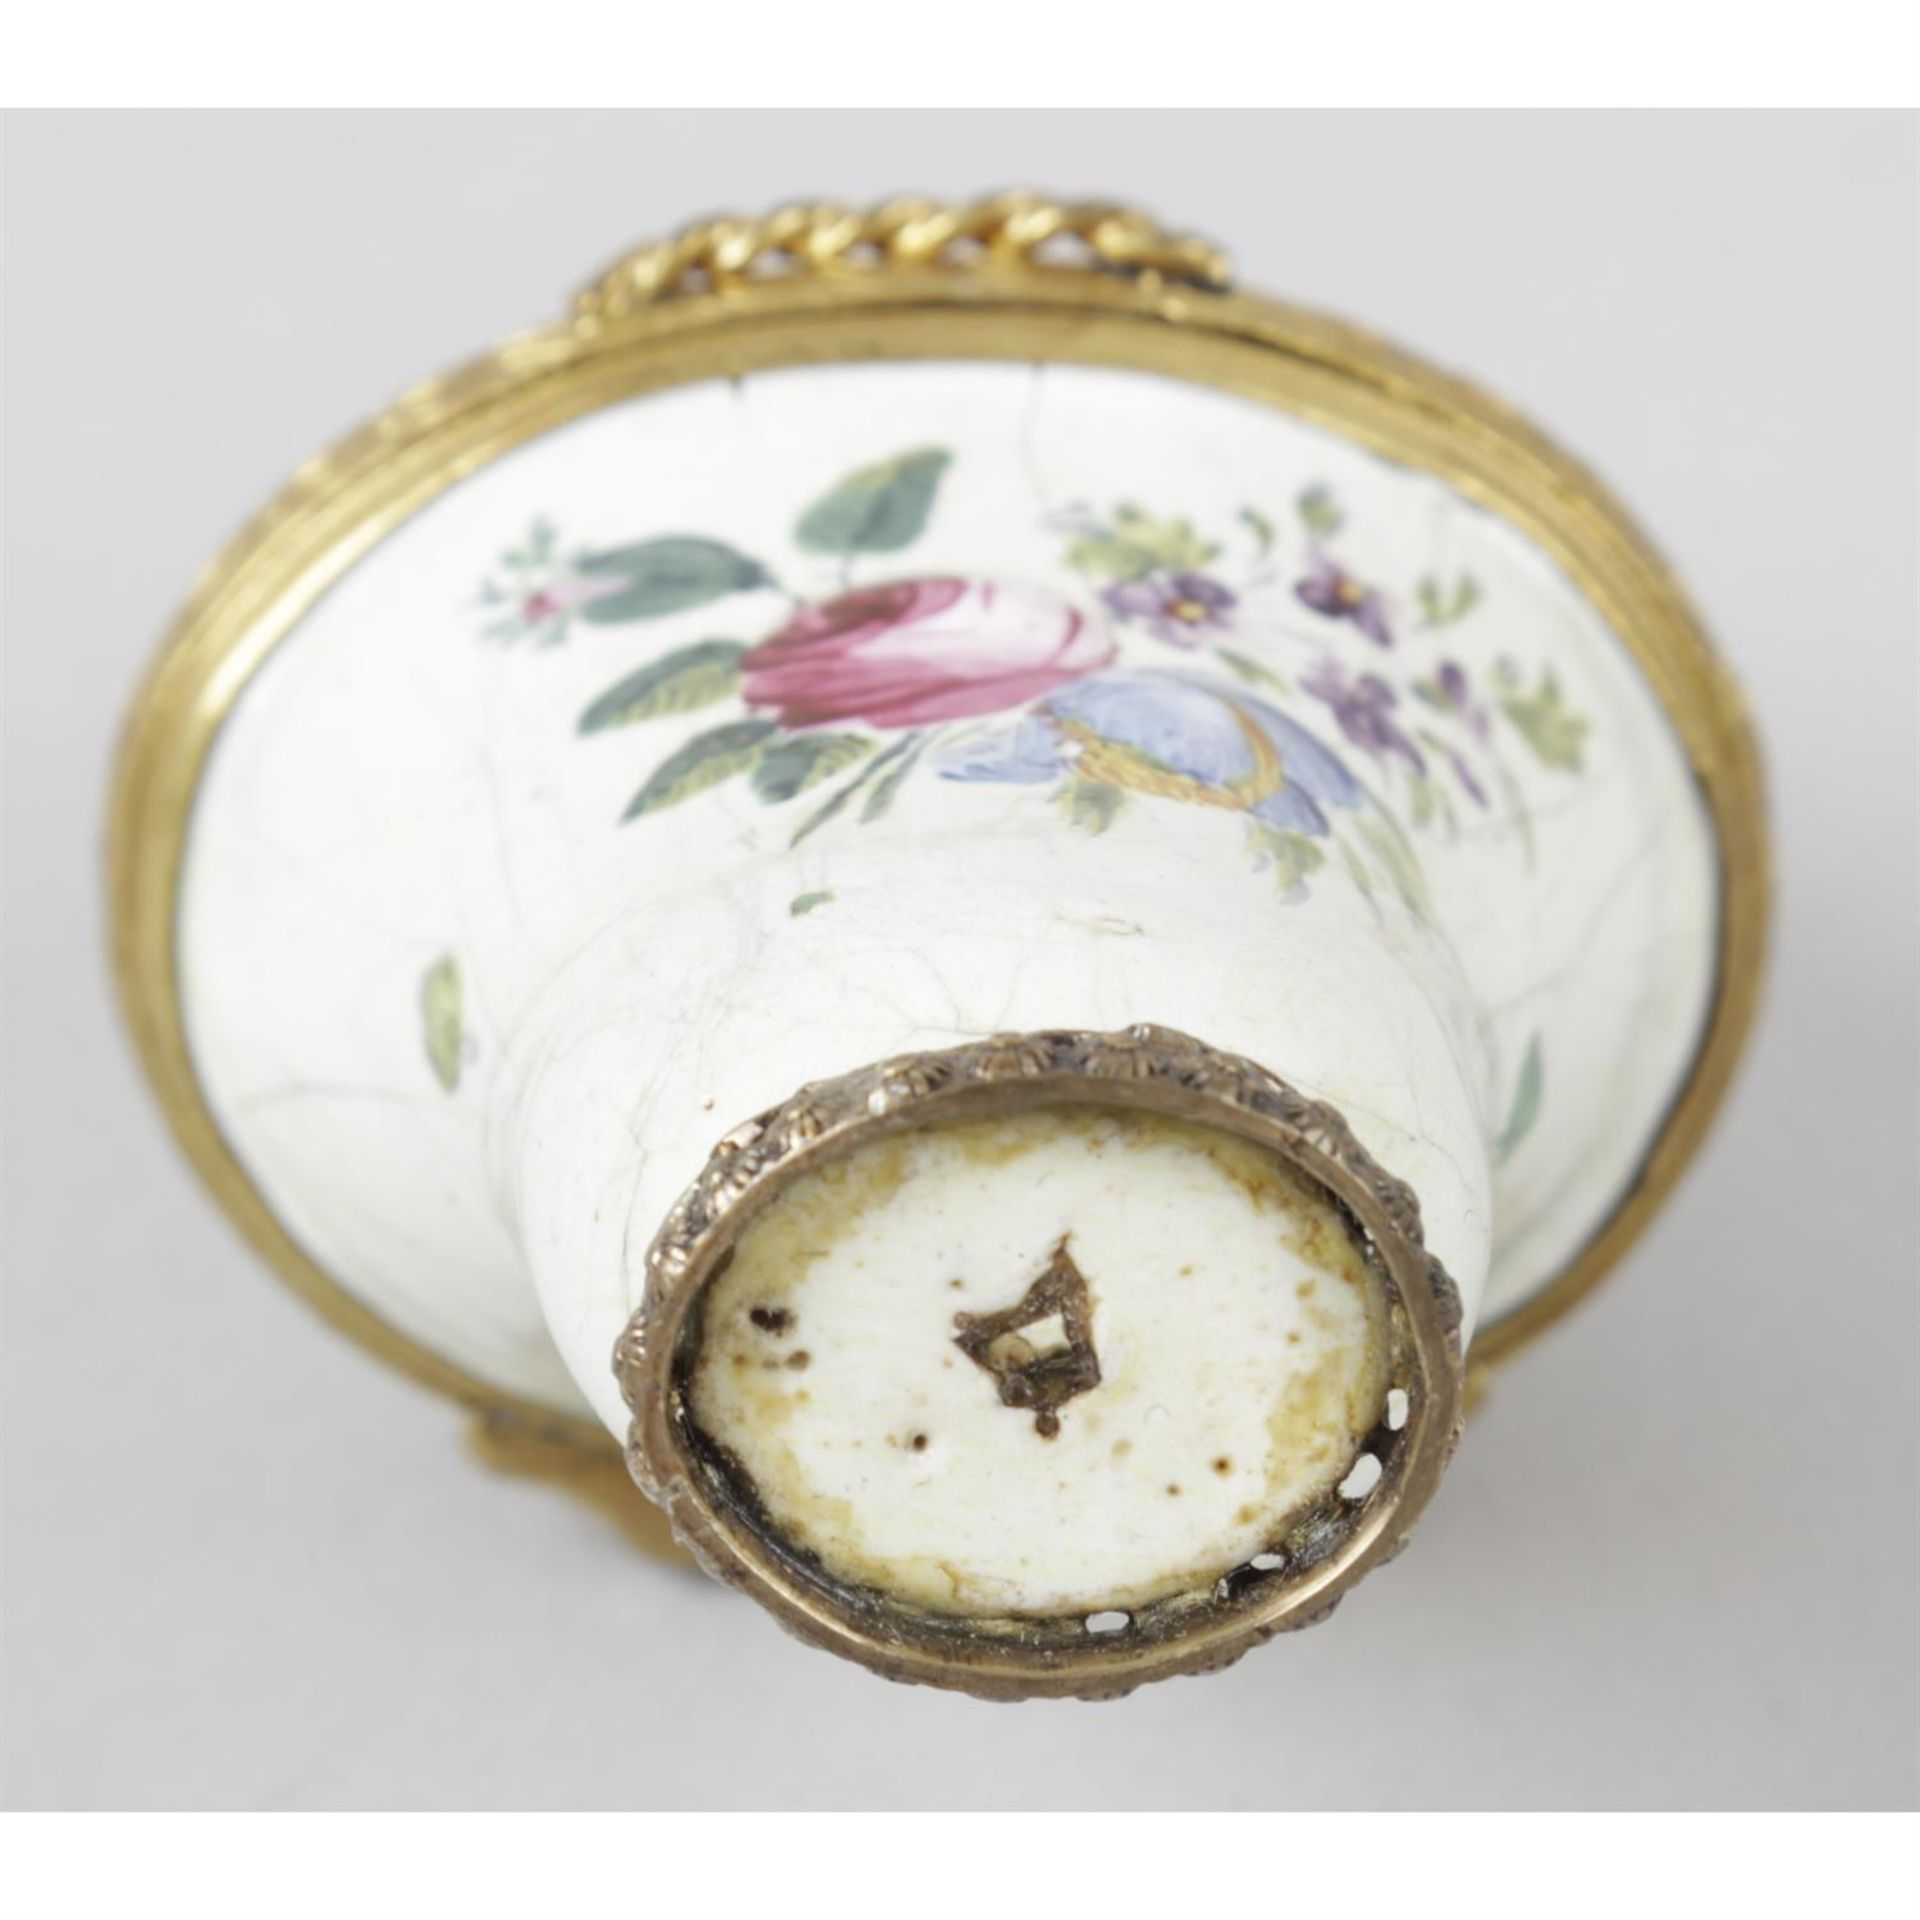 An antique enamelled ladies scent bottle and vanity case. - Image 2 of 2